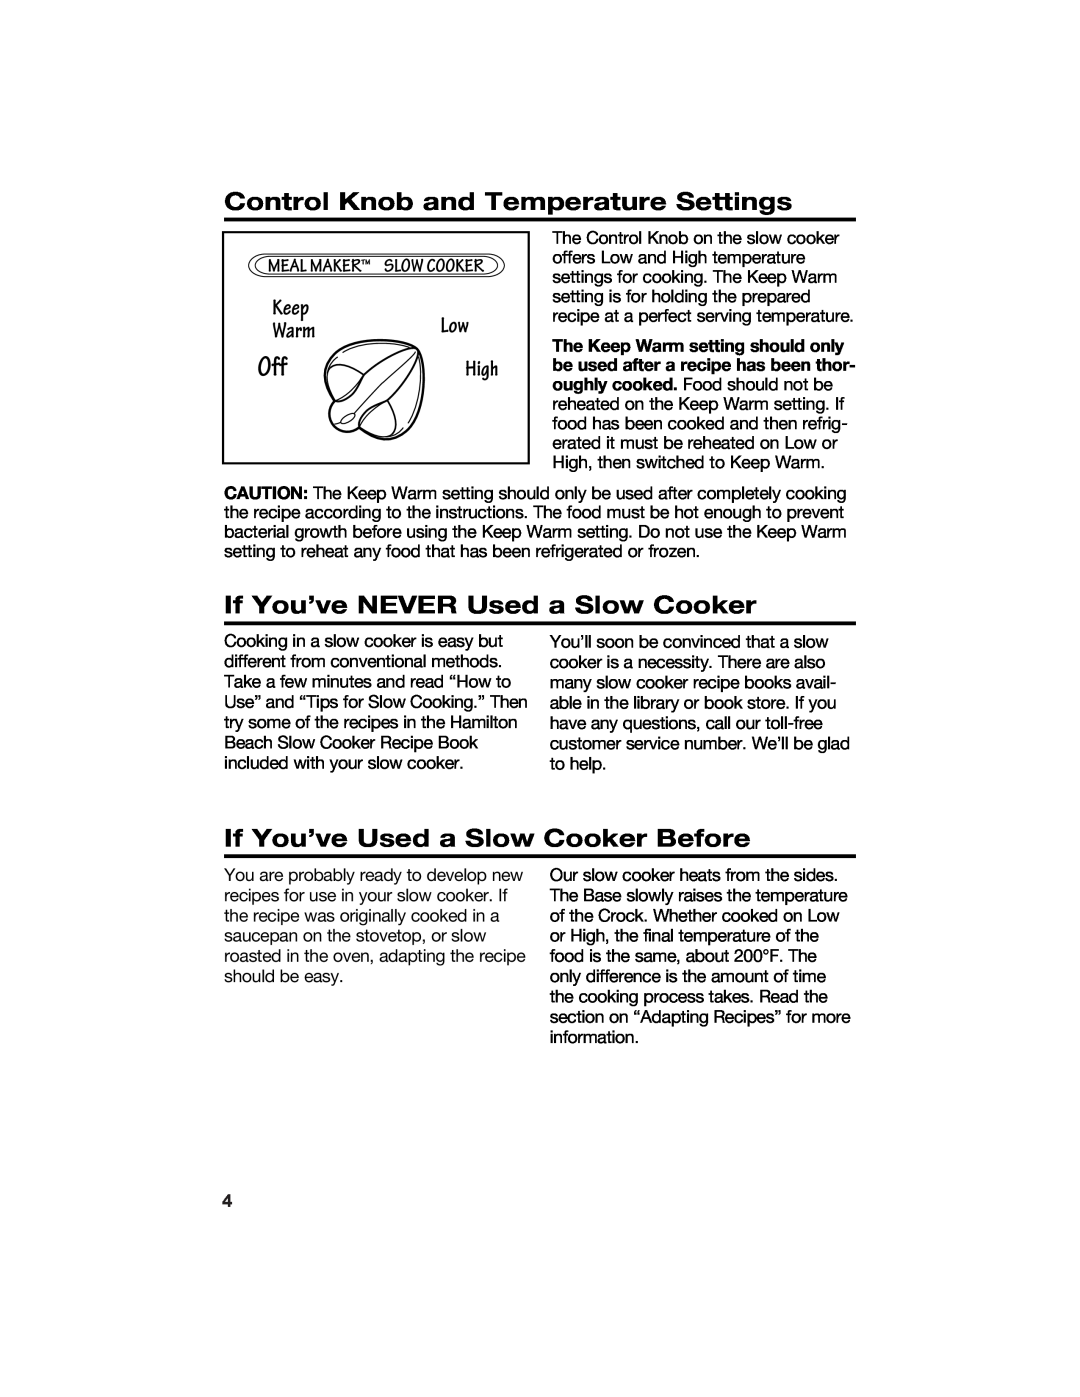 Hamilton Beach 840084500 manual Control Knob and Temperature Settings, If You’ve NEVER Used a Slow Cooker 